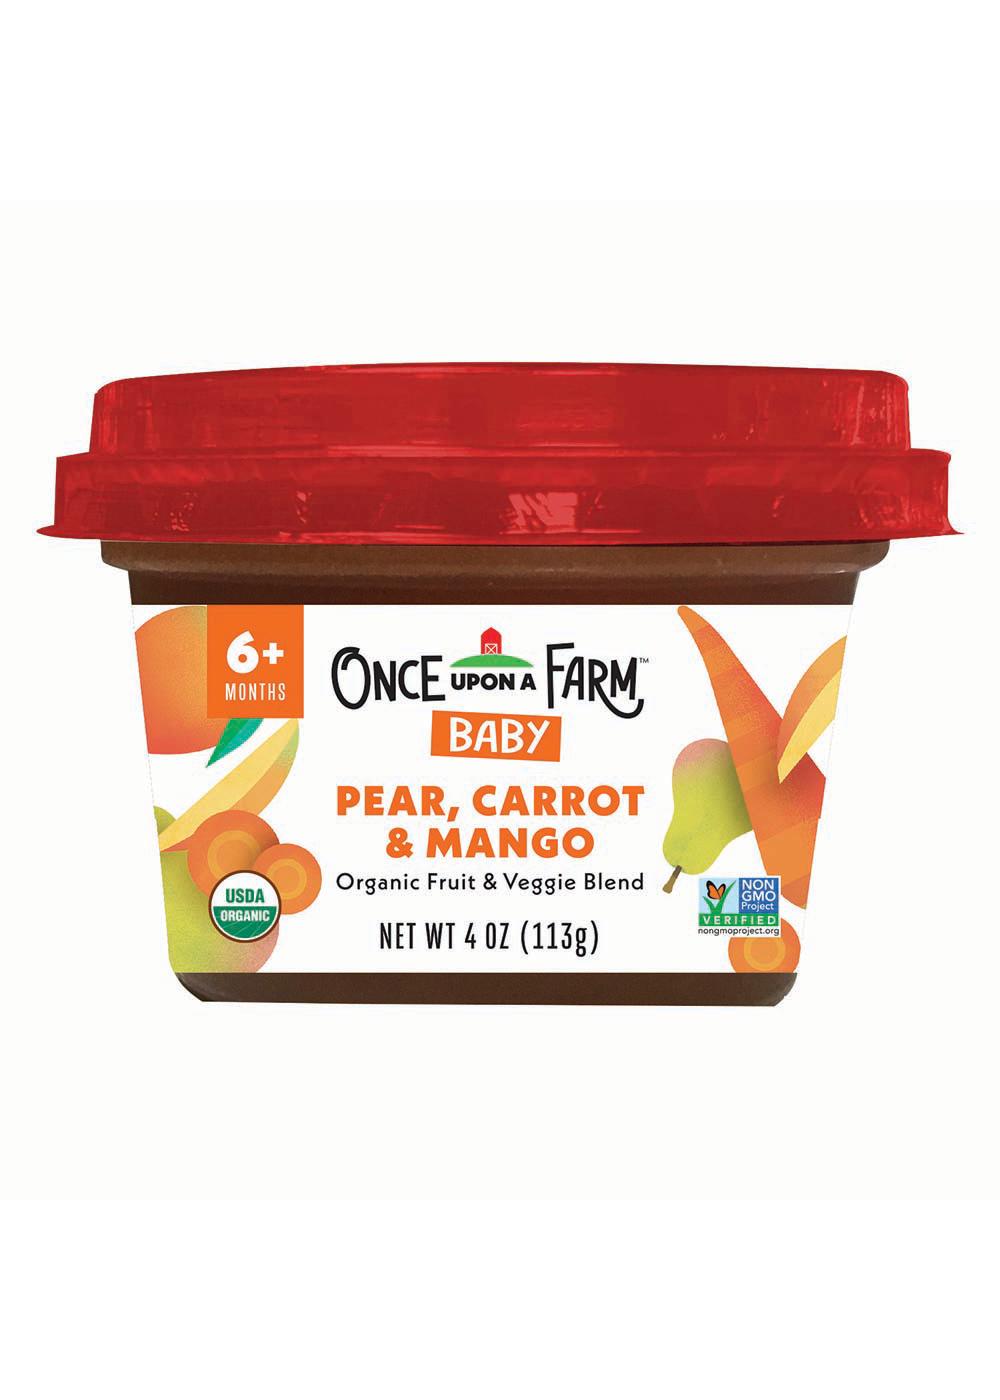 Once Upon a Farm Organic Baby Food - Pear Carrot & Mango; image 1 of 2